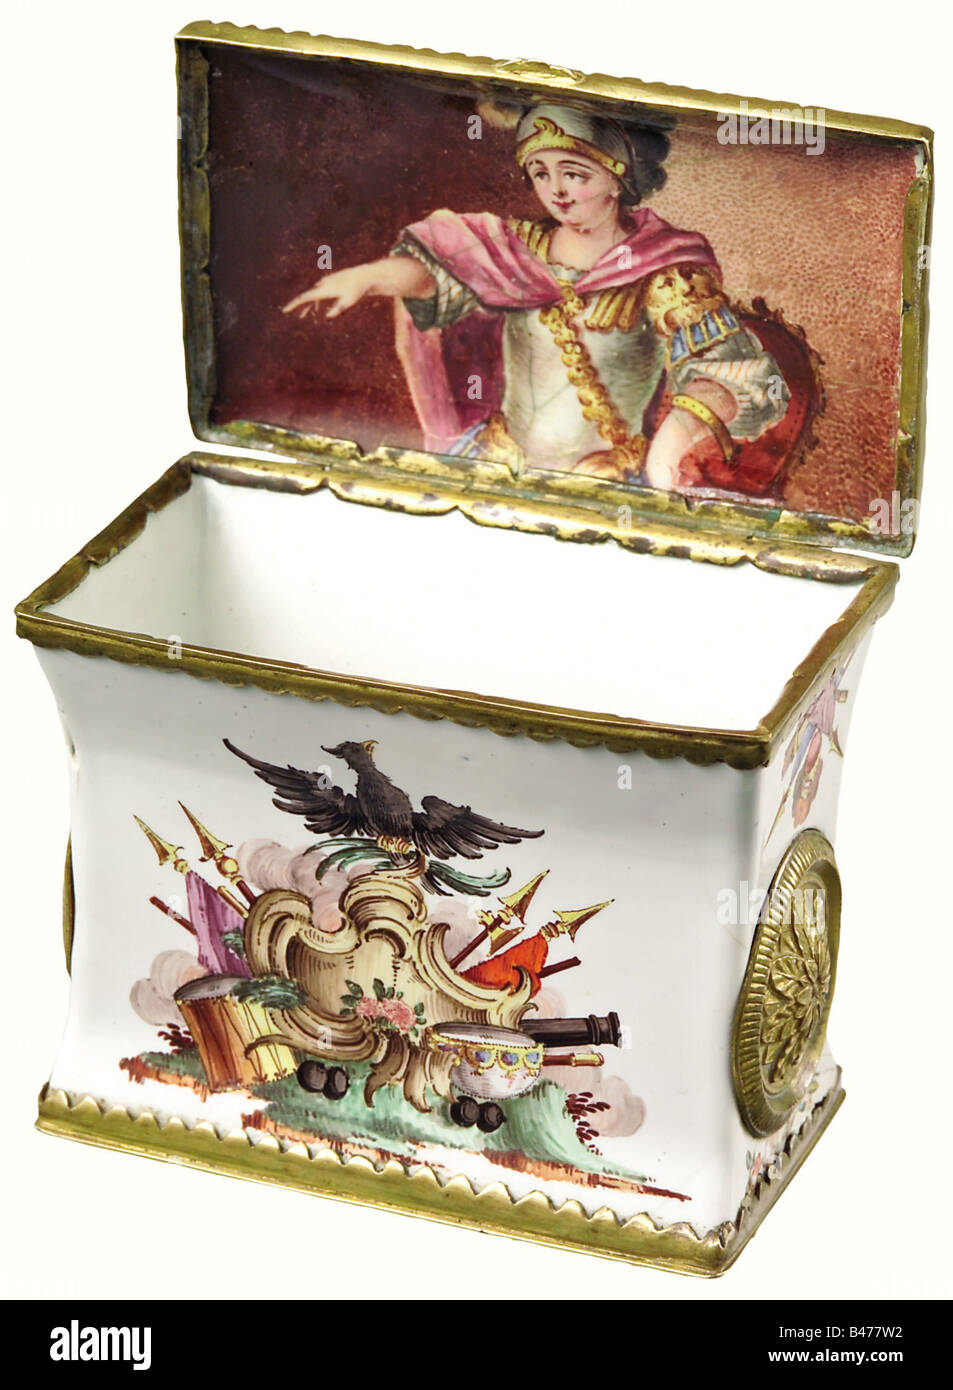 An enamelled table tobacco box, Prussia, middle of the 18th century. Enamelled and hand-painted copper sheet with formerly gold-plated brass edging and bottom. The arched lid and front and back sides (inverted) are decorated with banners, drums, a cannon barrel and cannon balls as well as rocaille beneath a seated Prussian eagle. The narrow sides with floral brass disks and painted trophy ornamentation. In the lid is a picture of the war god Mars in armour. The other surfaces are in white enamel. The lid is abraded with hair-line cracks and small rest, Artist's Copyright has not to be cleared Stock Photo